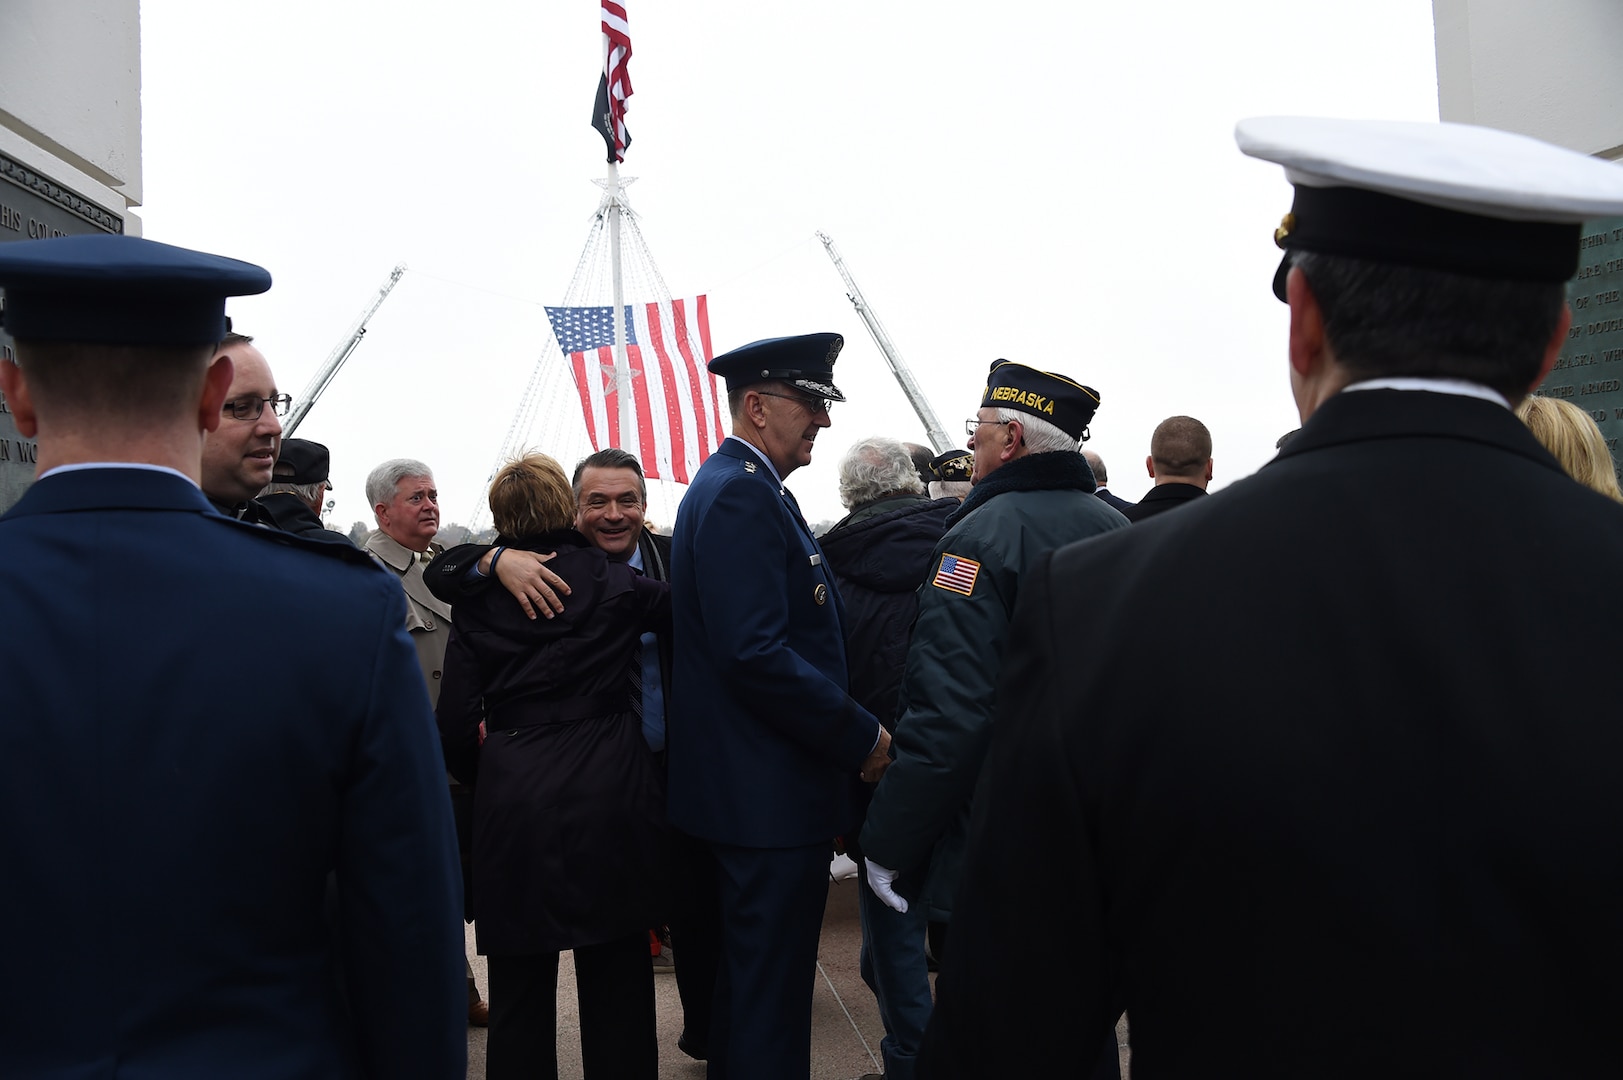 U.S. Air Force Gen. John Hyten (center), commander of U.S. Strategic Command, speaks with a member of the rifle team before a Veterans Day ceremony at Memorial Park in Omaha, Neb., Nov. 11, 2017. More than 200 people attended the ceremony to honor the service and sacrifice of American veterans and their families.